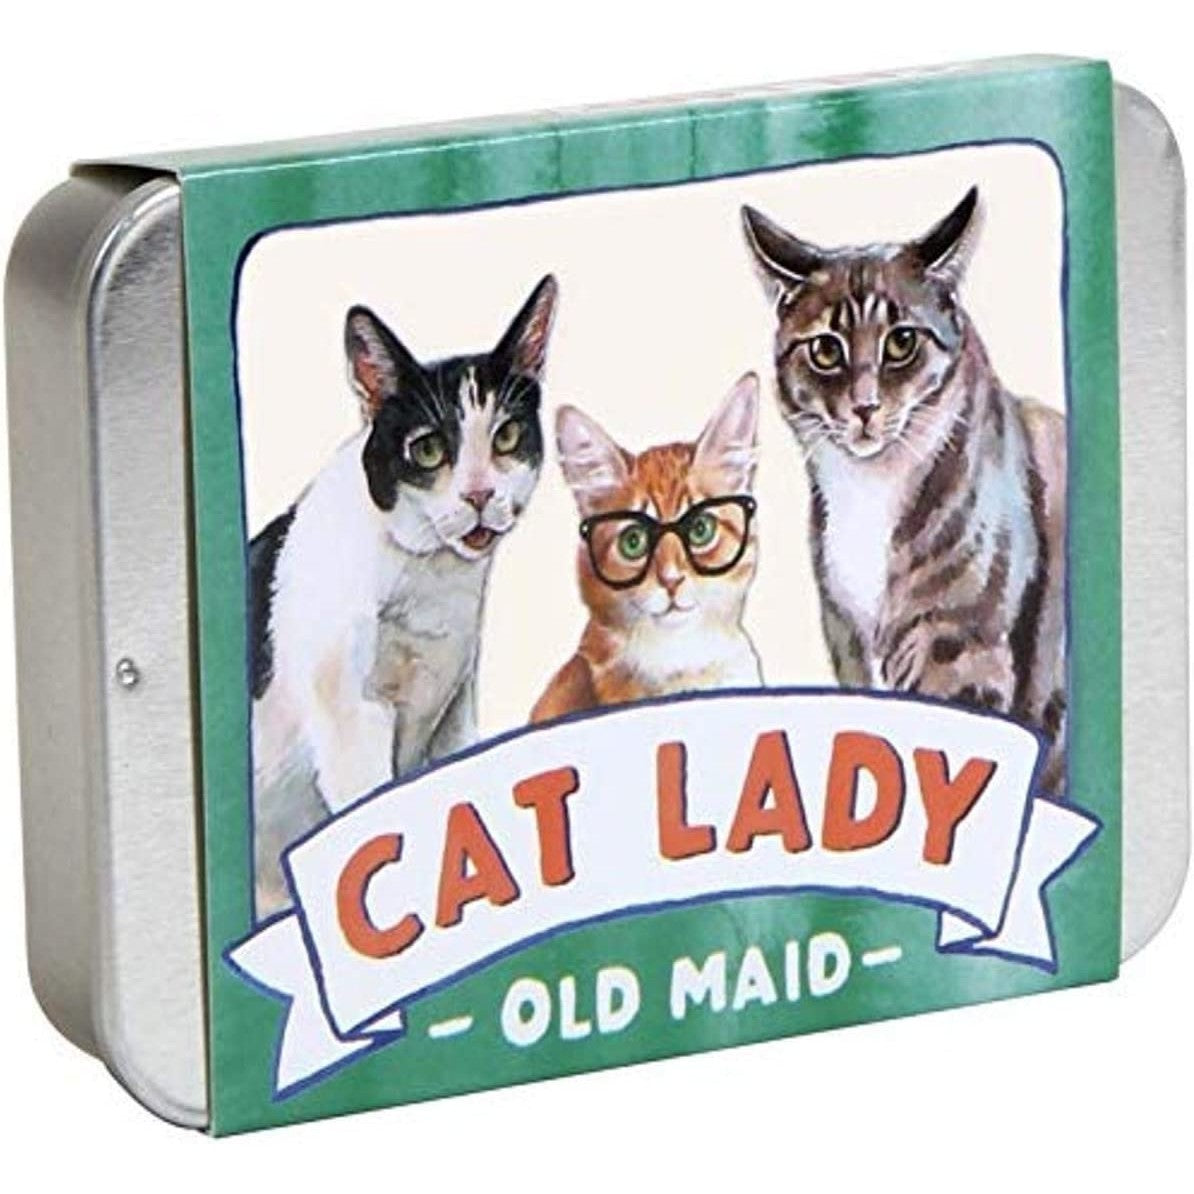 A tin box for a cat lady old maid game.